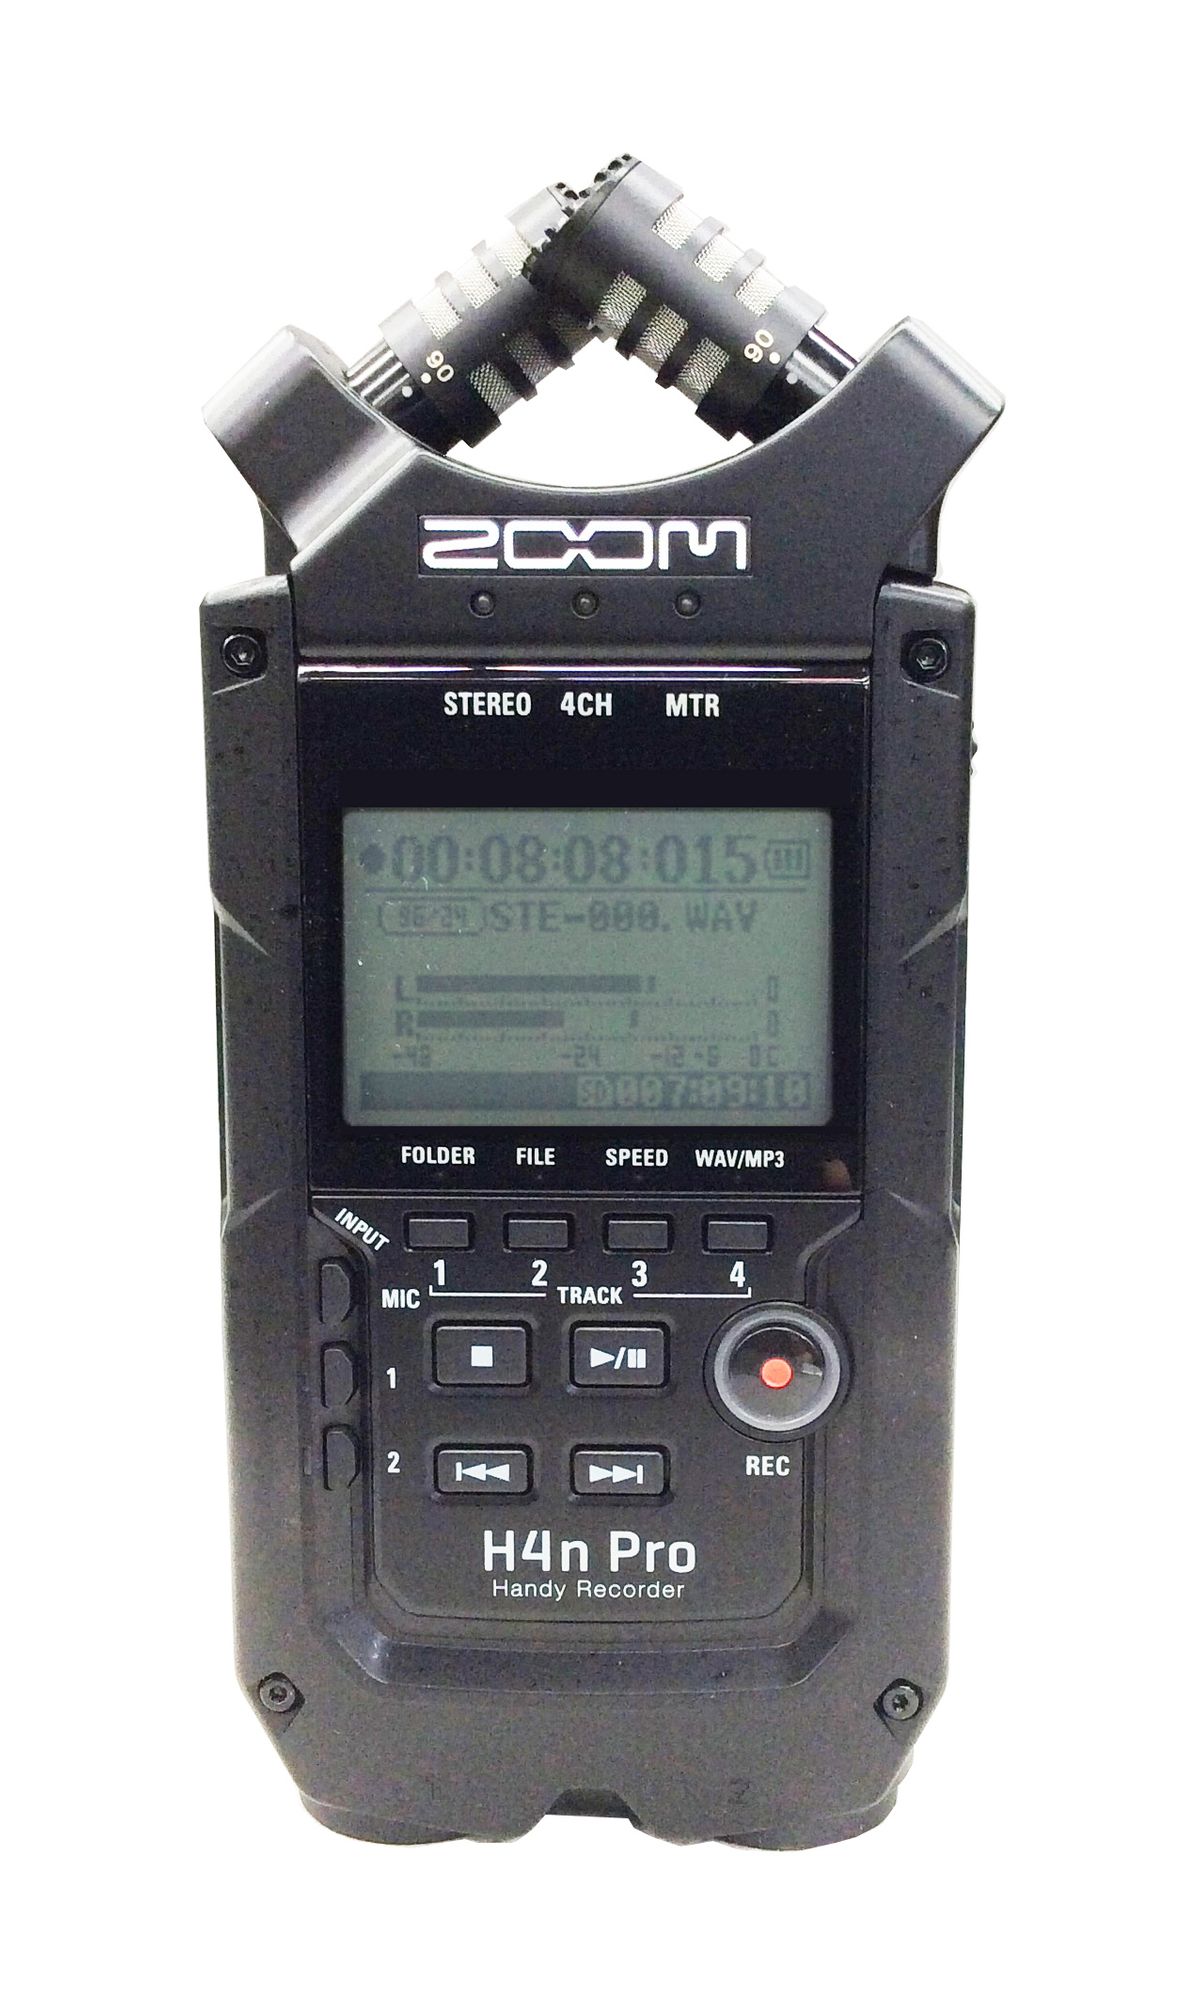  Zoom H4n Pro  Handy Recorder available at Hollywood Sound Systems.